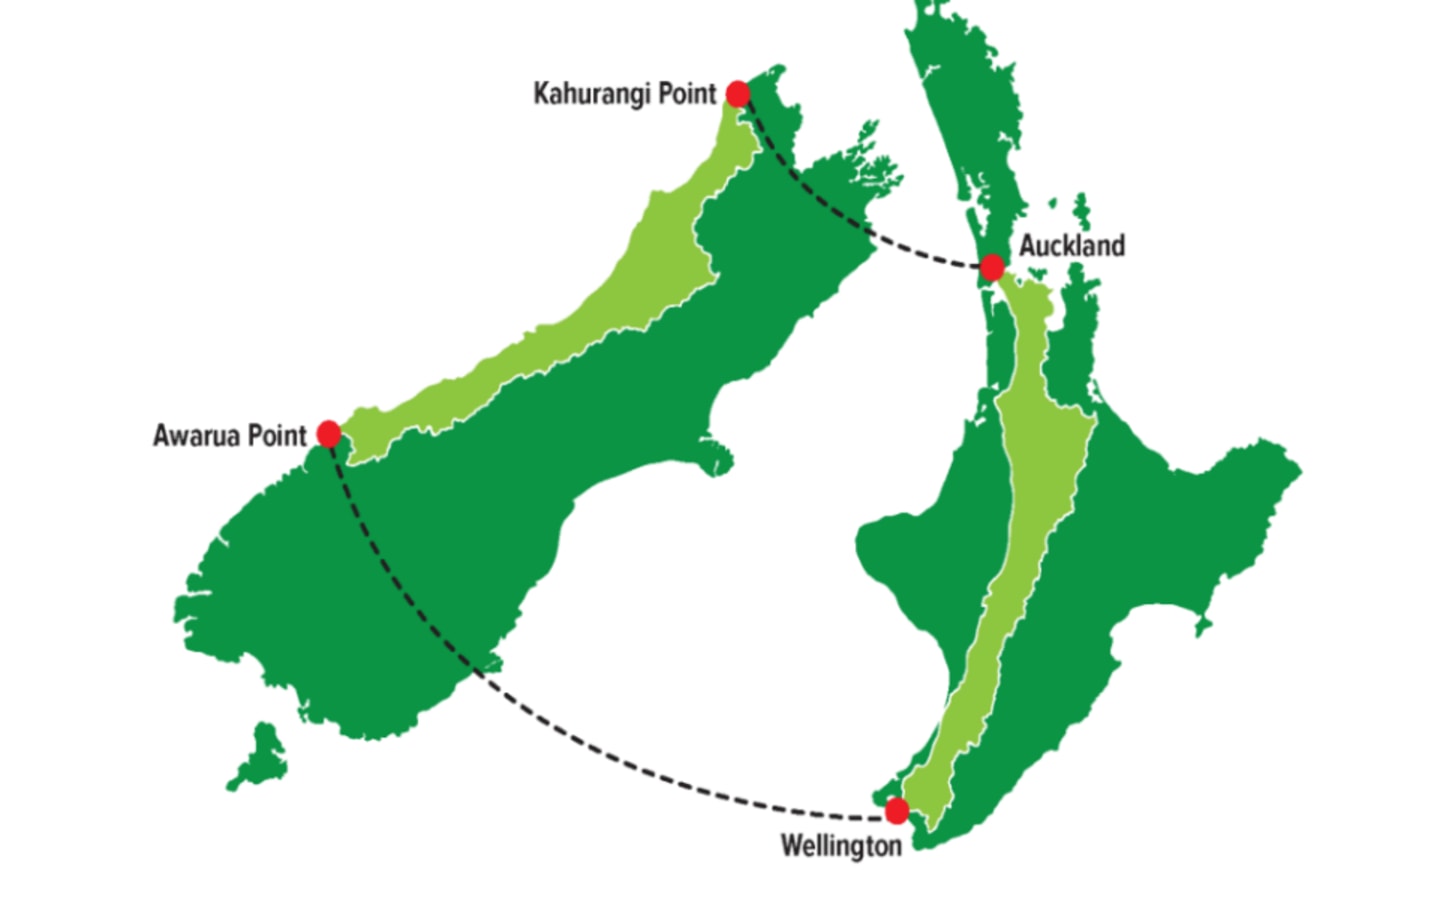 A geographic comparison of the 650km long West Coast Region, often used by the regional council in official submissions to highlight the challenges in servicing the sparsely populated region (about 32,000).